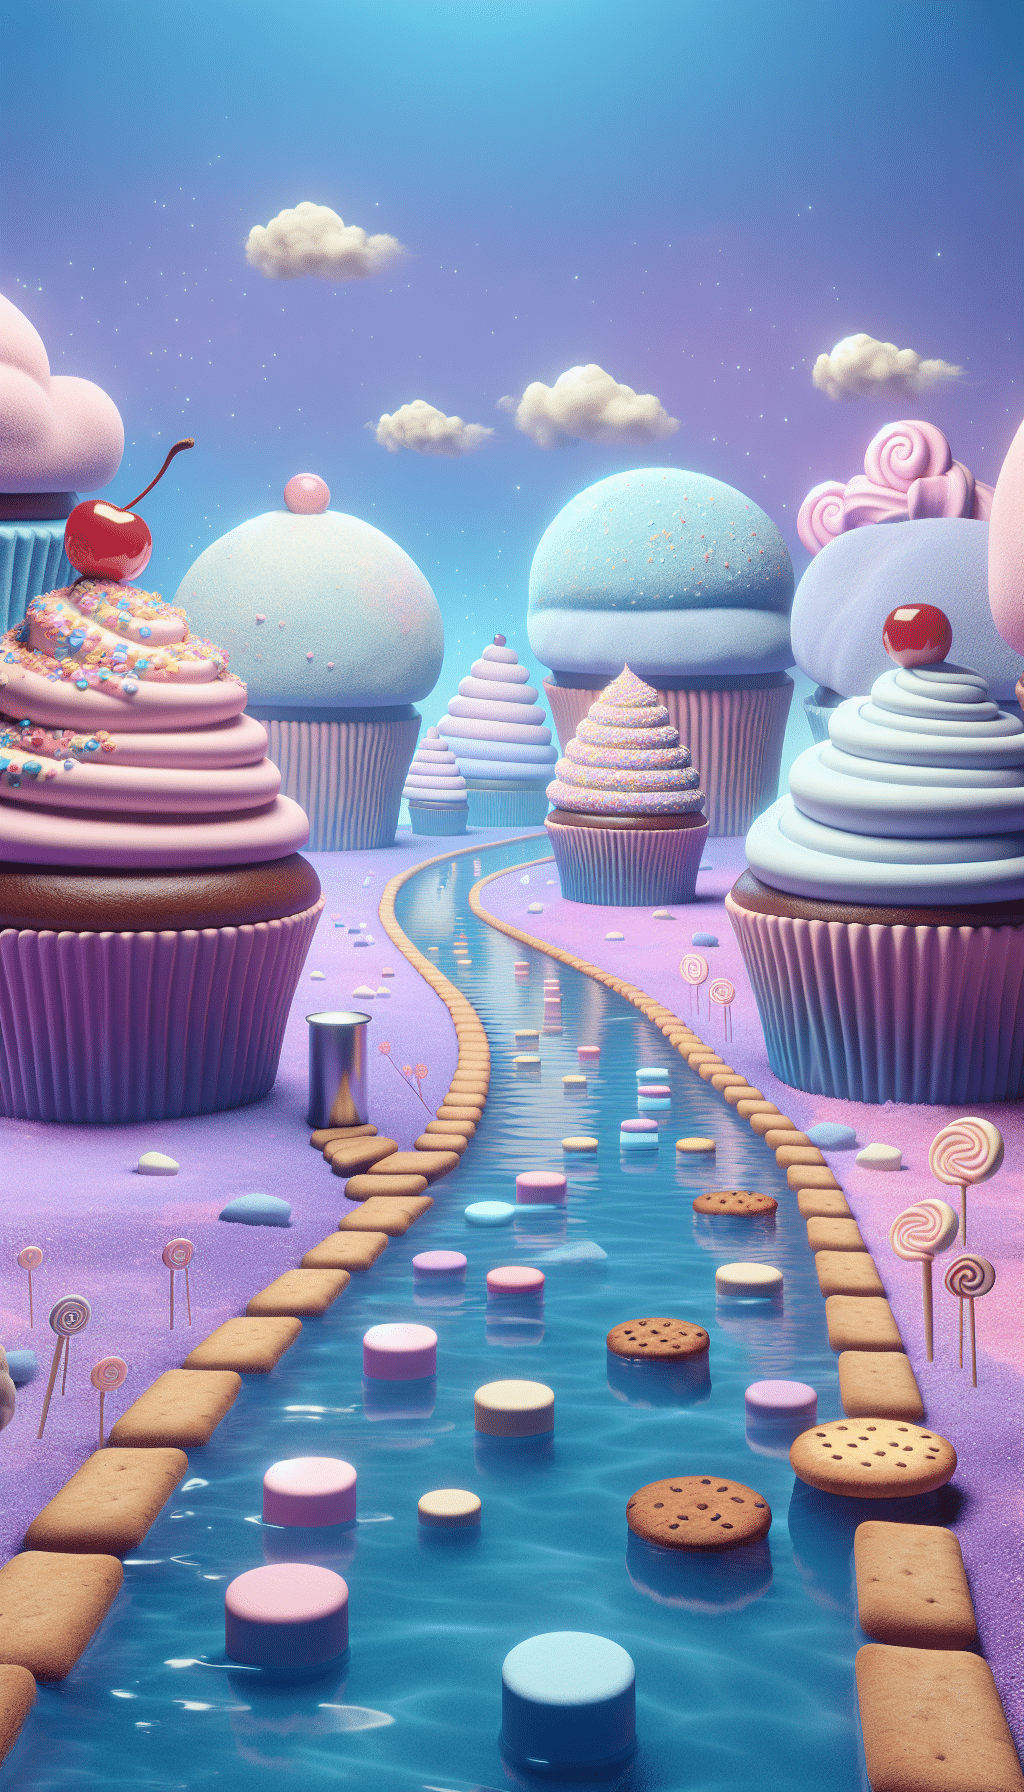 cupcake dream meaning